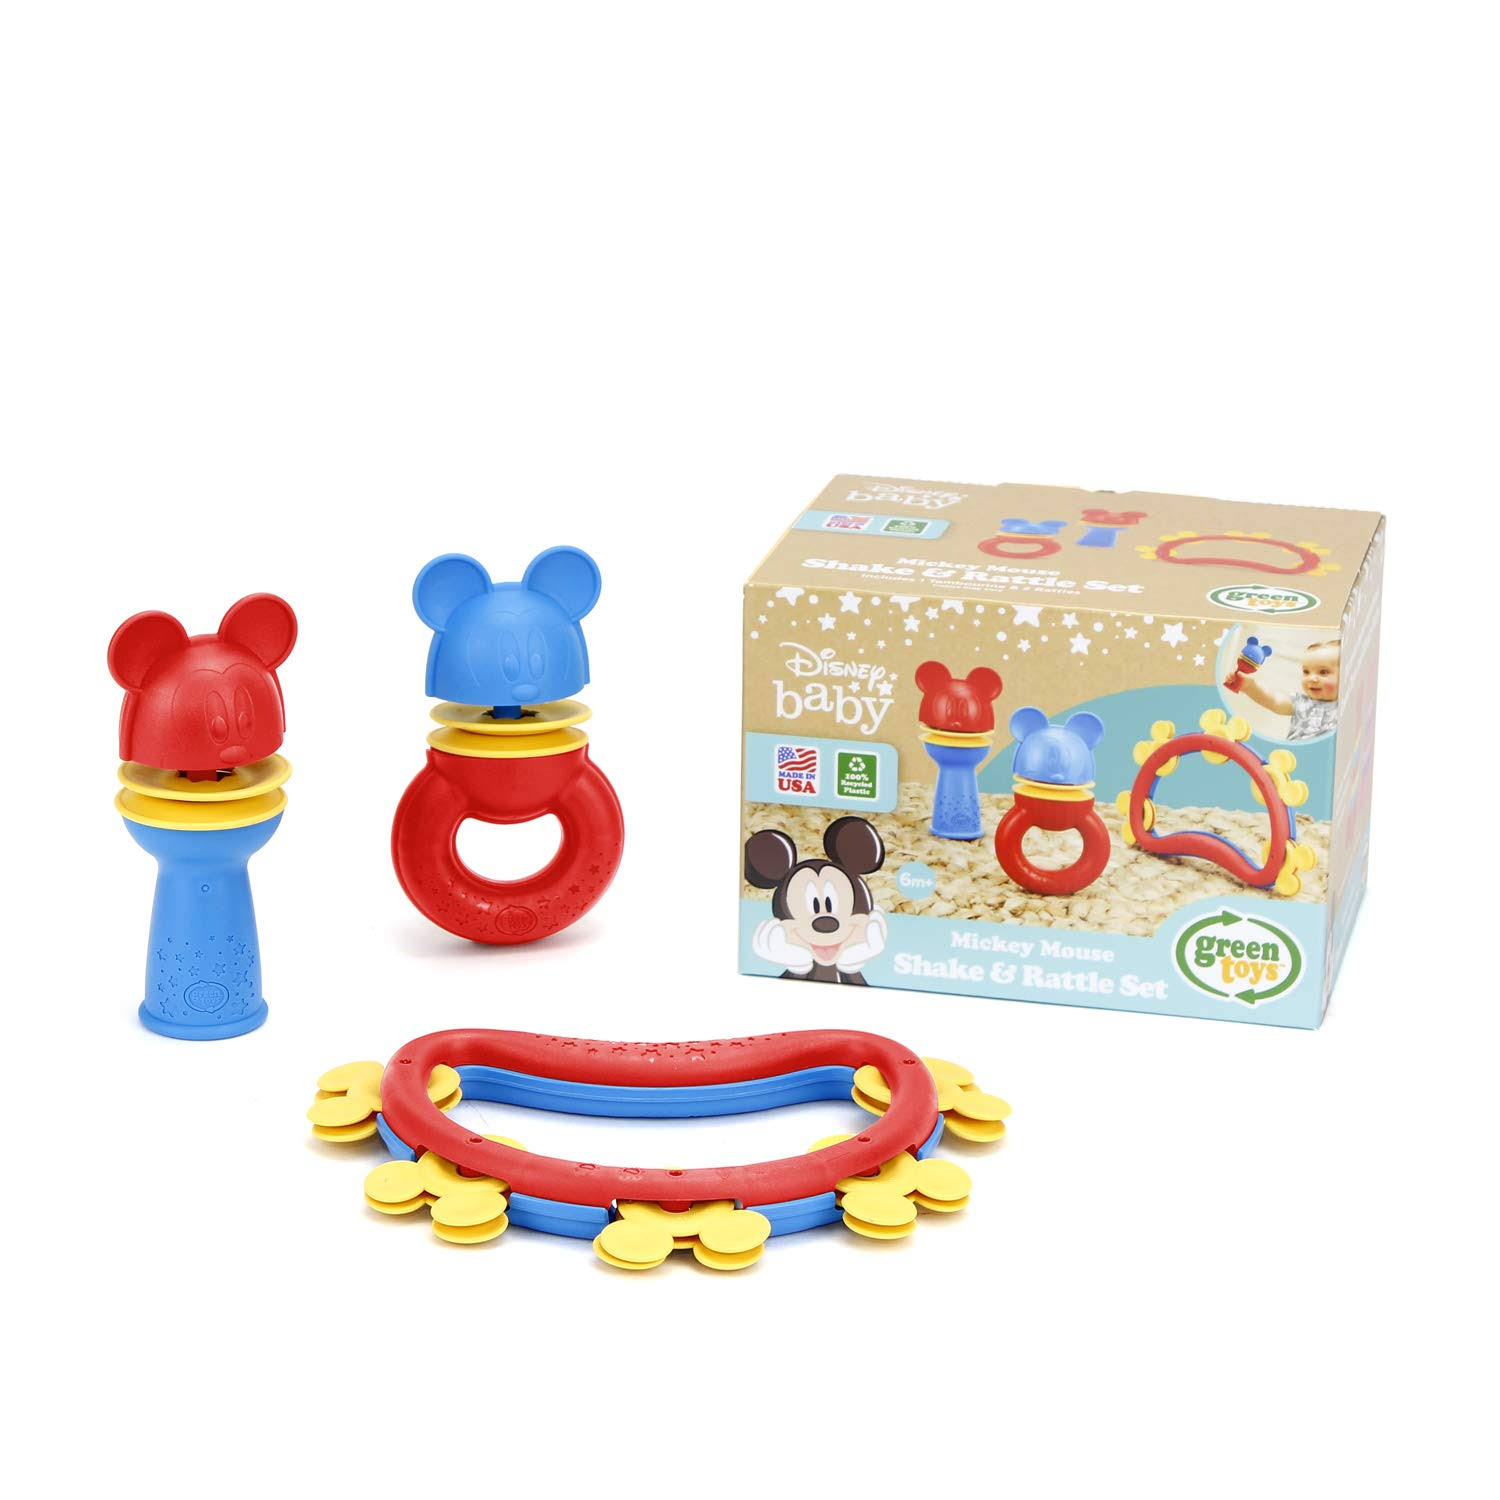 Green Toys Disney Baby - Mickey Mouse Shake & Rattle Set